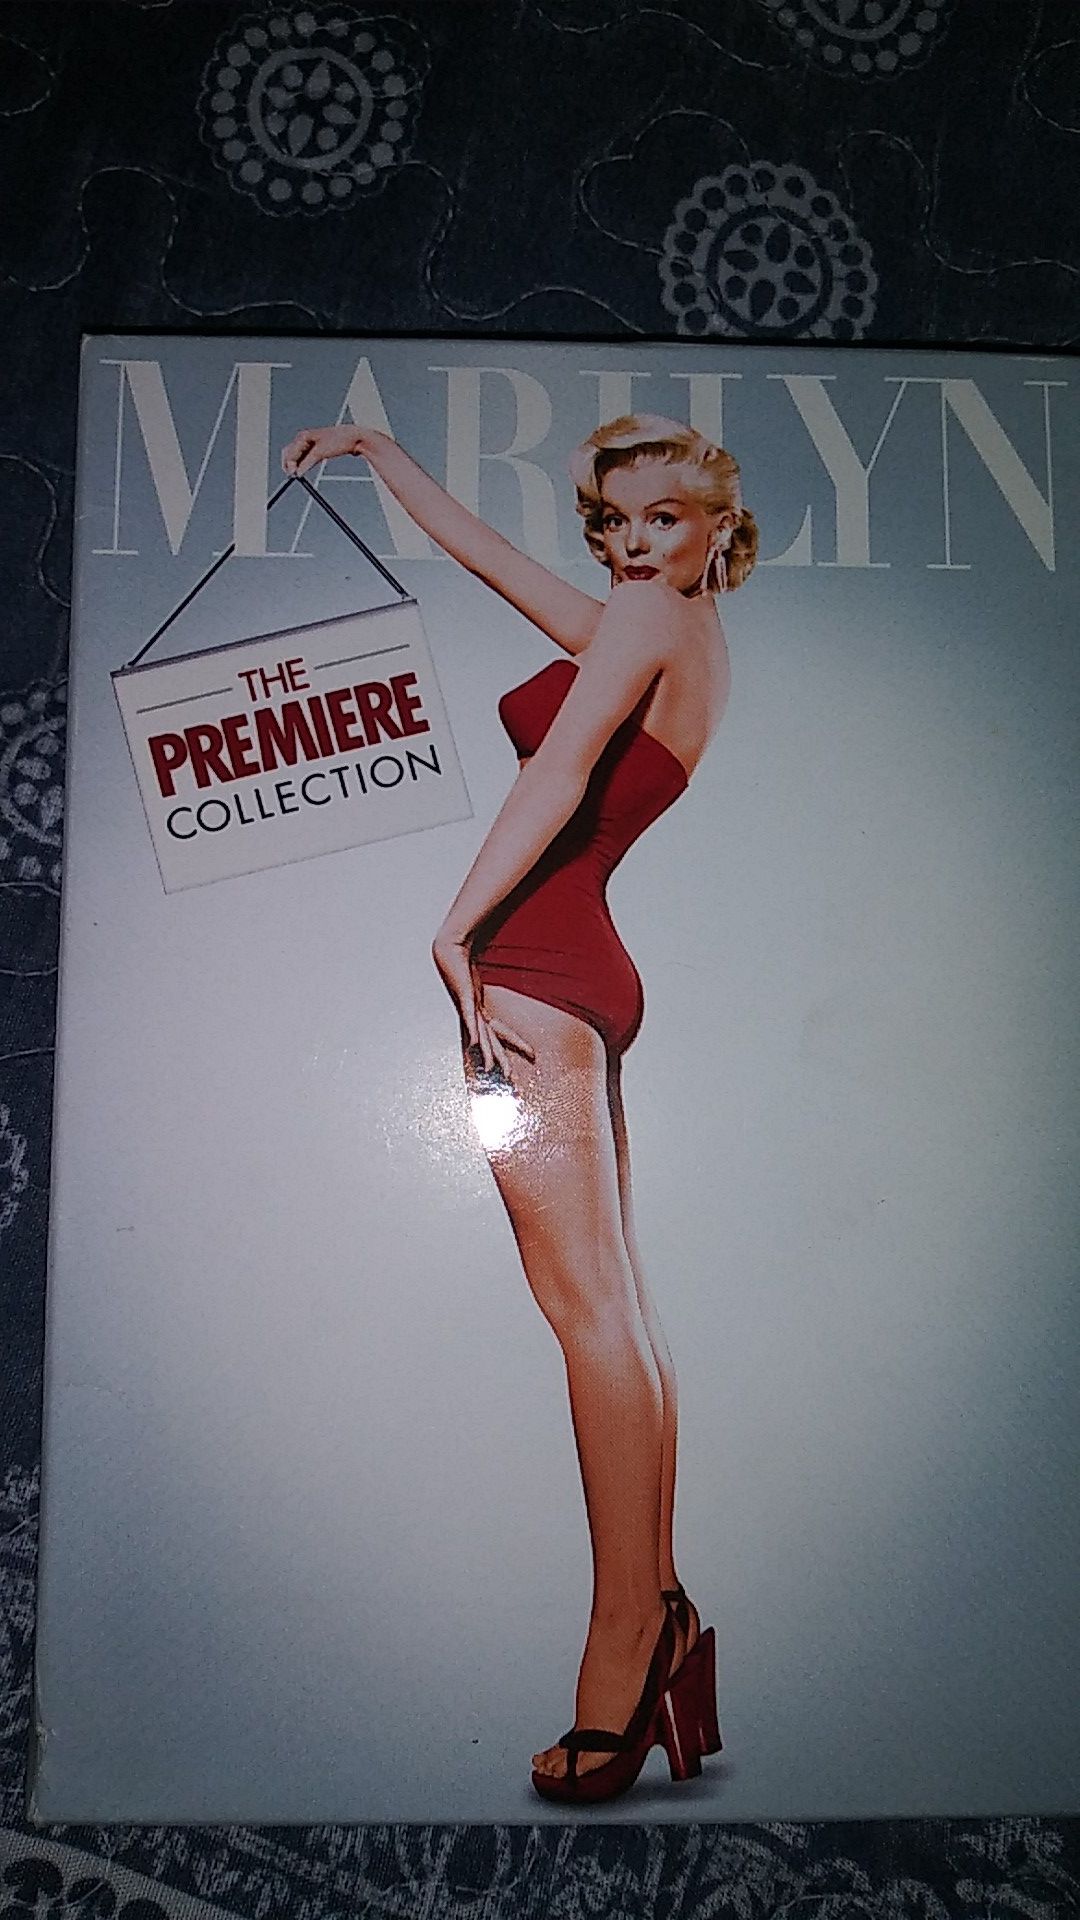 Marilyn Premiere Collection DVD